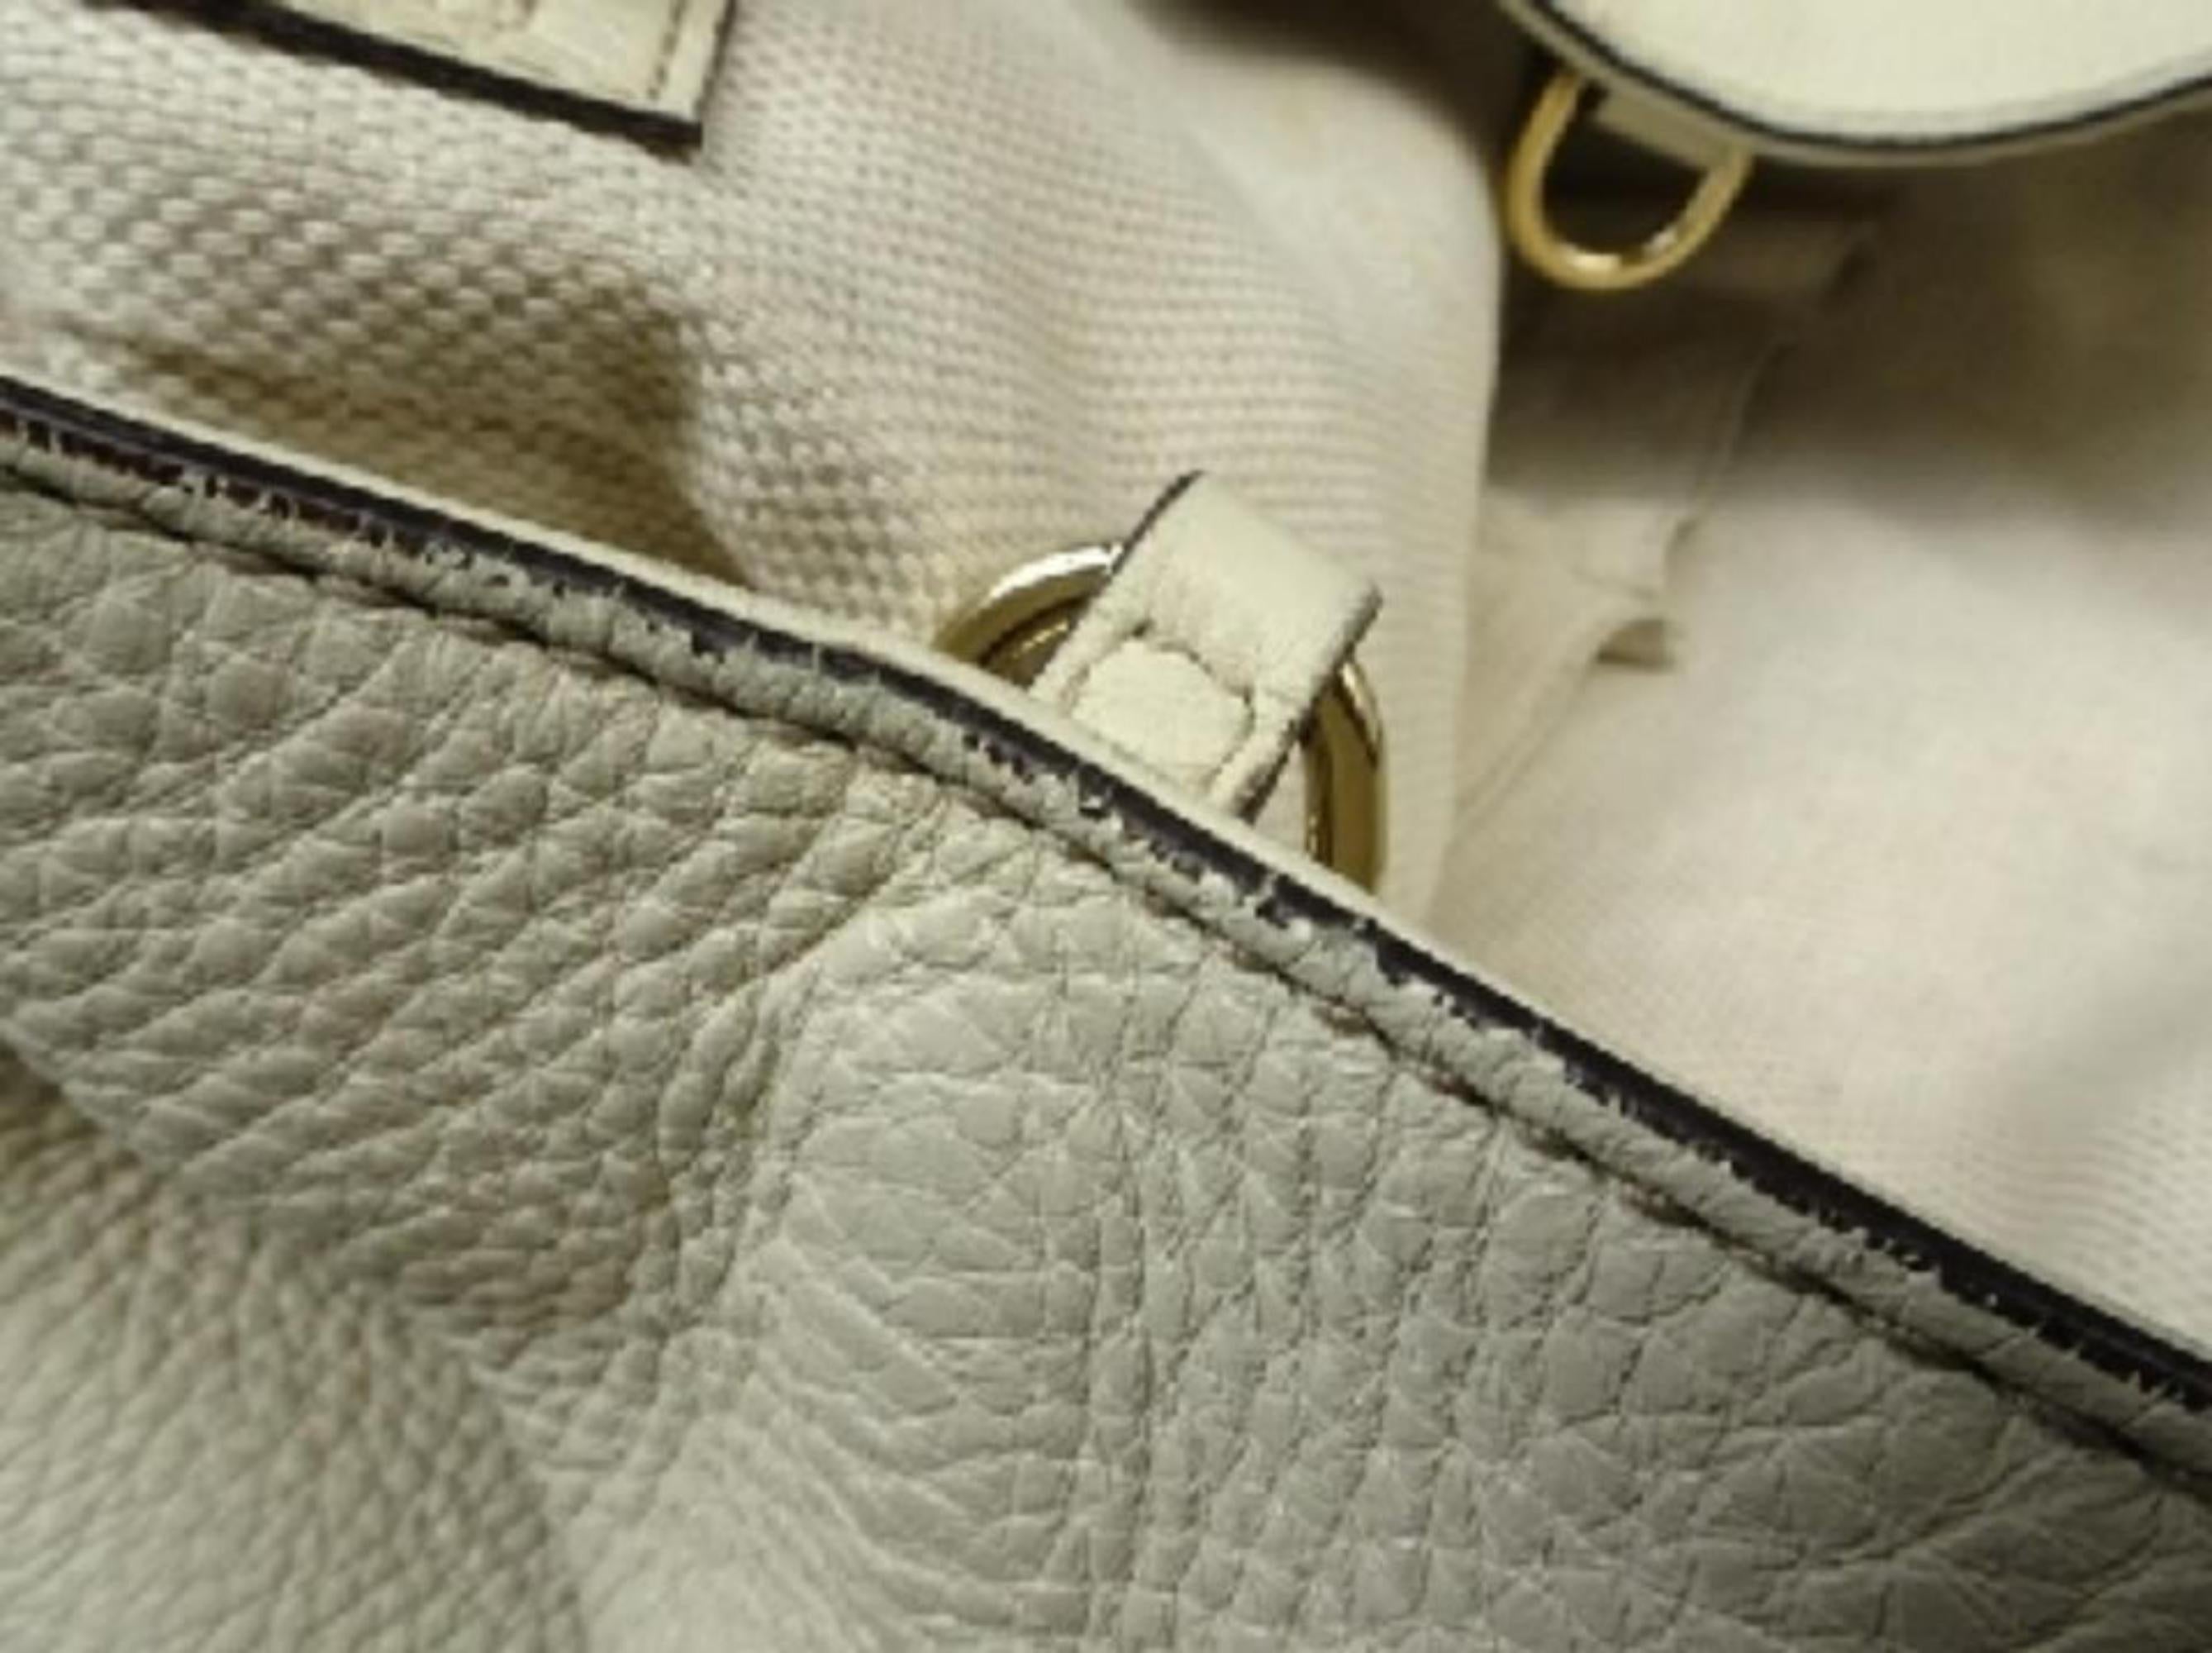 Gucci Soho Convertible 219069 Ivory Leather Shoulder Bag In Good Condition For Sale In Forest Hills, NY